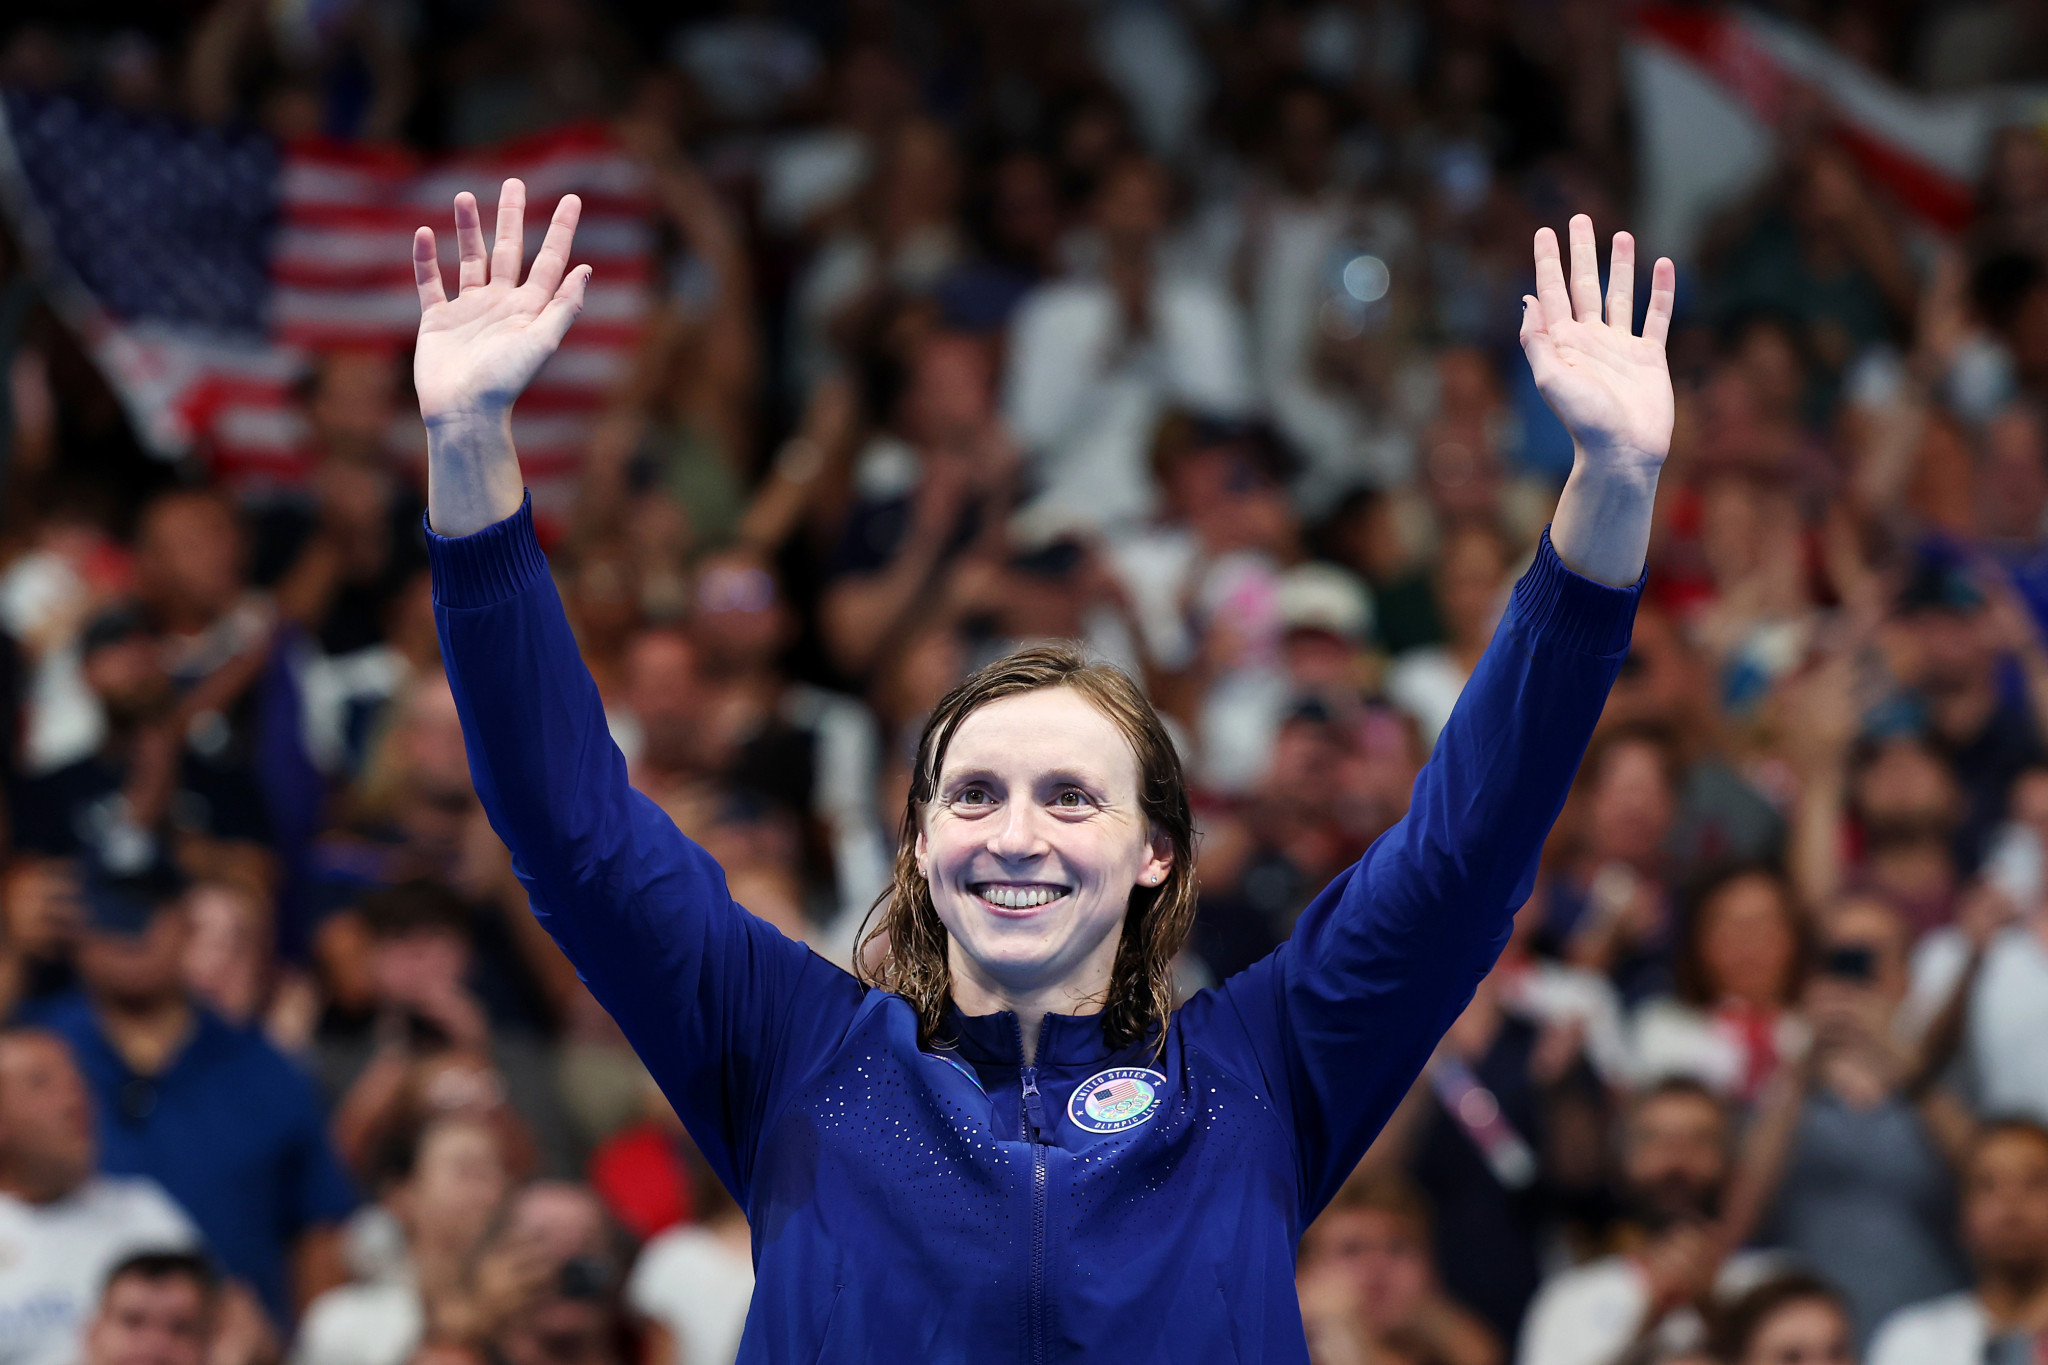 Gold Medalist Katie Ledecky of Team United States waves at fans from the podium after winning the Women's 1500m Freestyle Final at the Paris 2024 Olympic Games. GETTY IMAGES